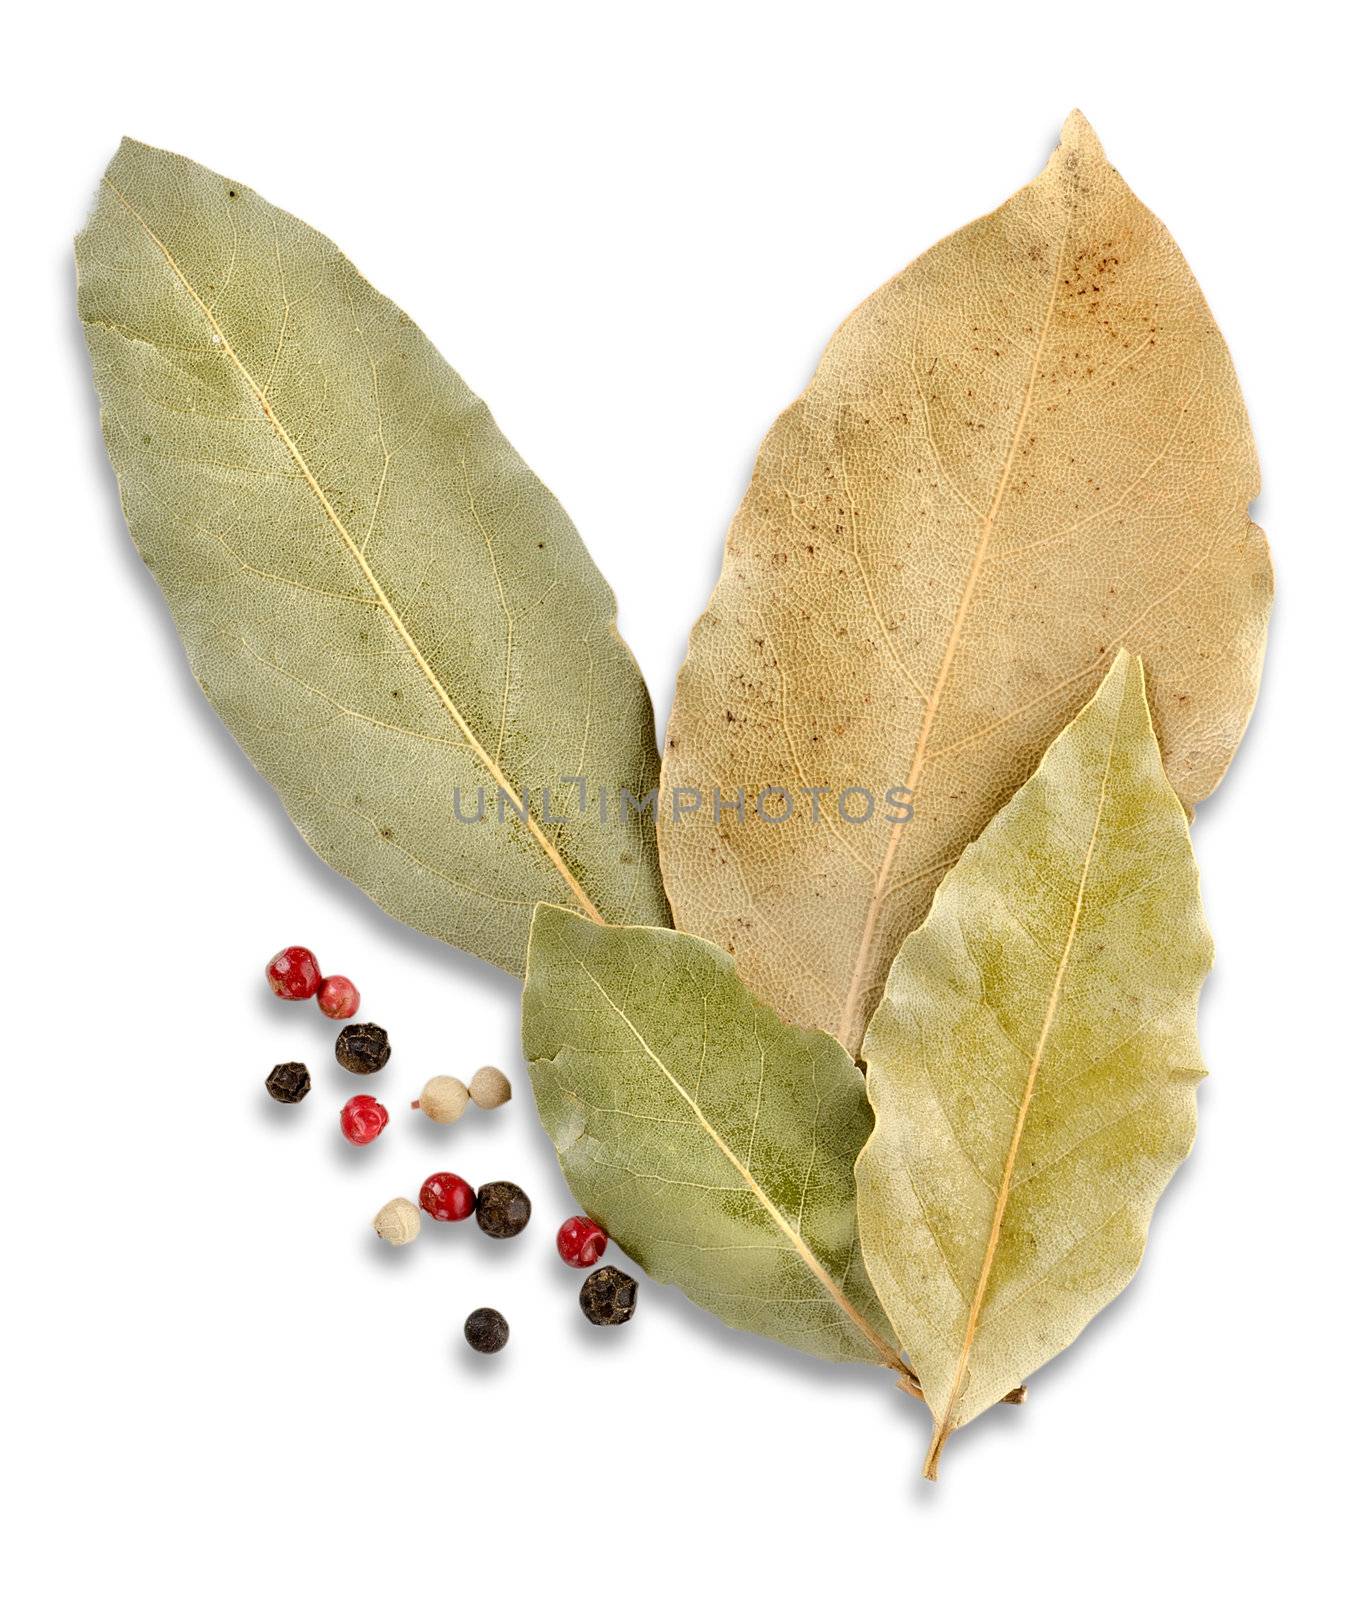 Bay leaves and spices by Givaga